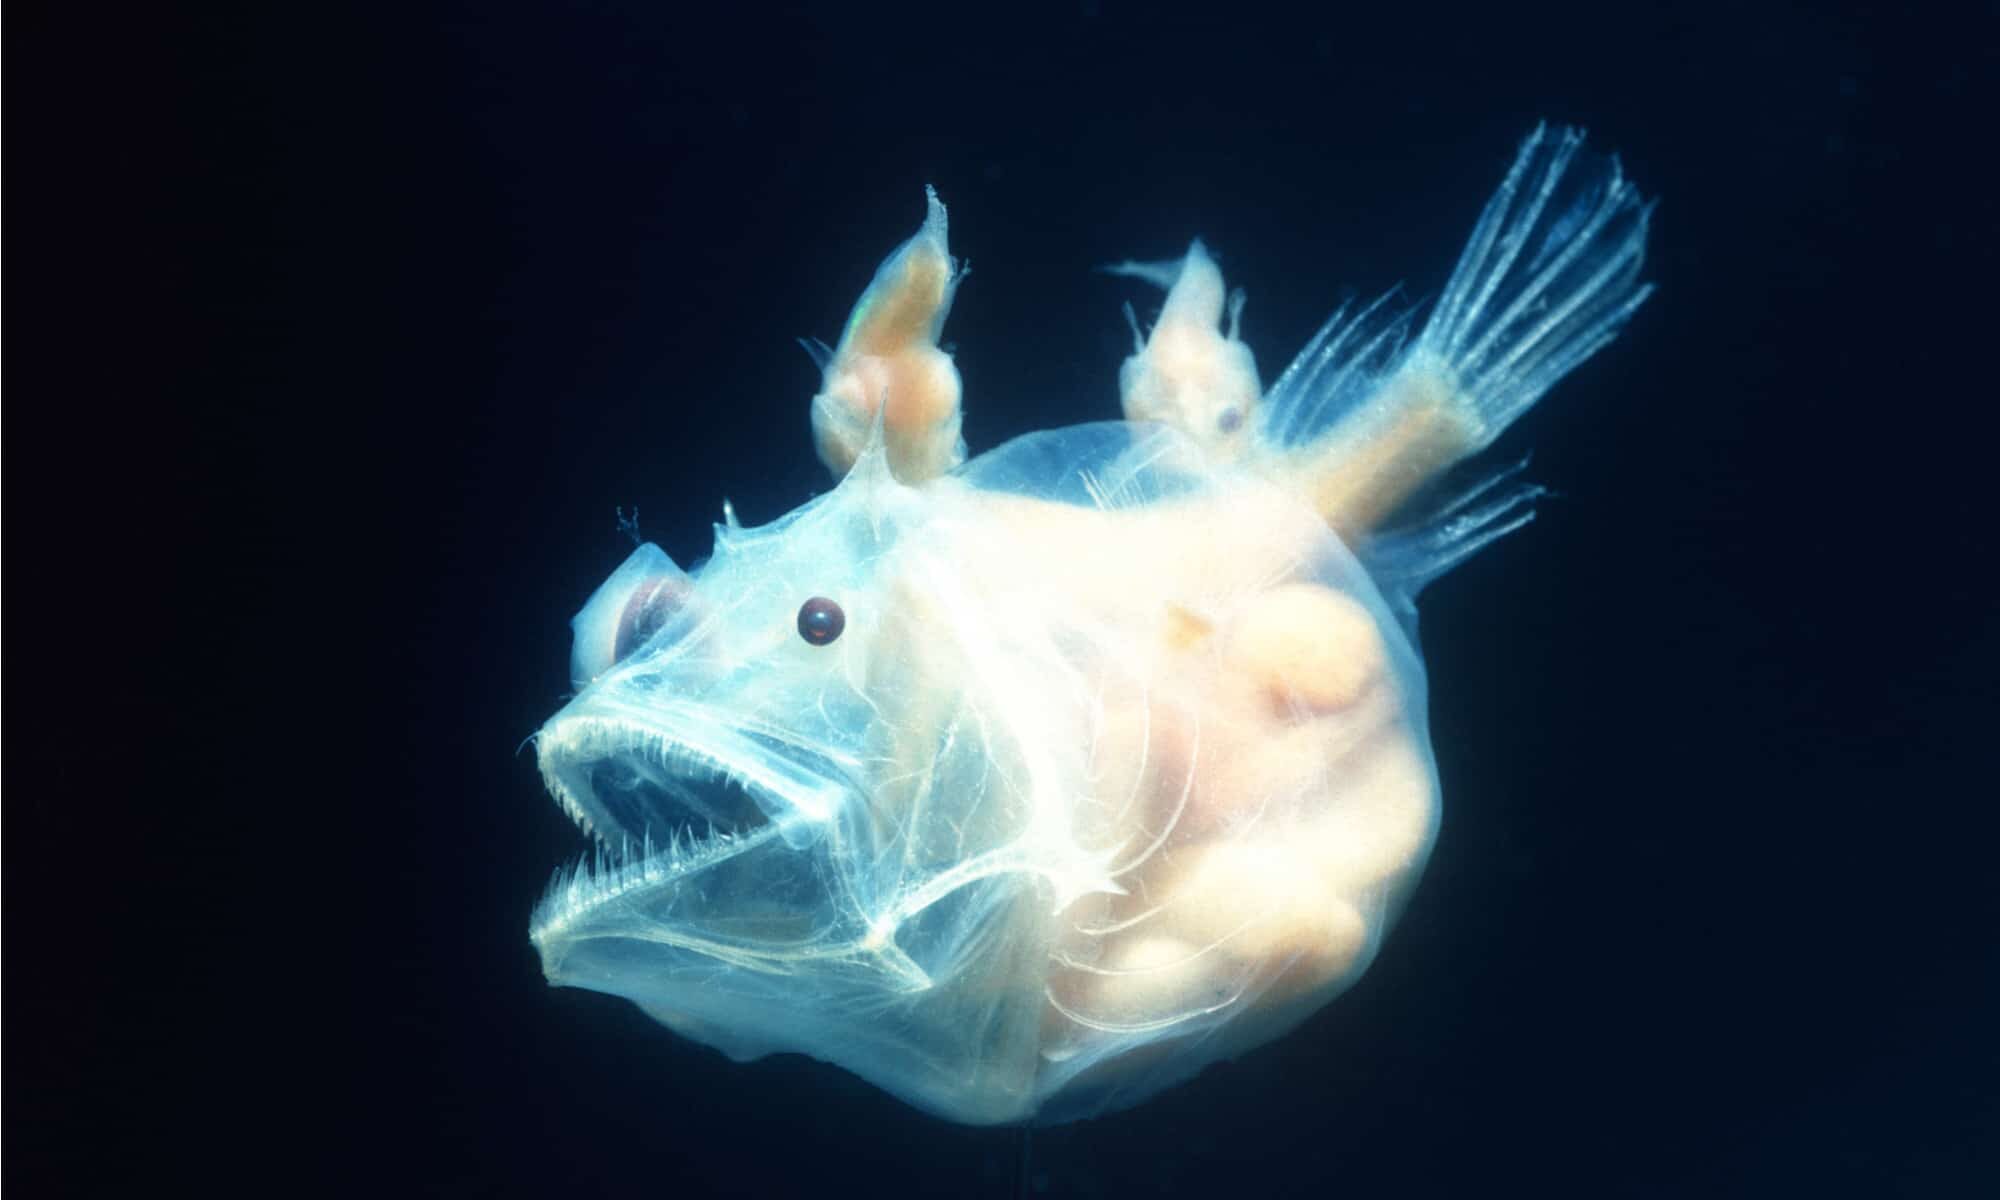 Anglerfish - Female with Male Attached